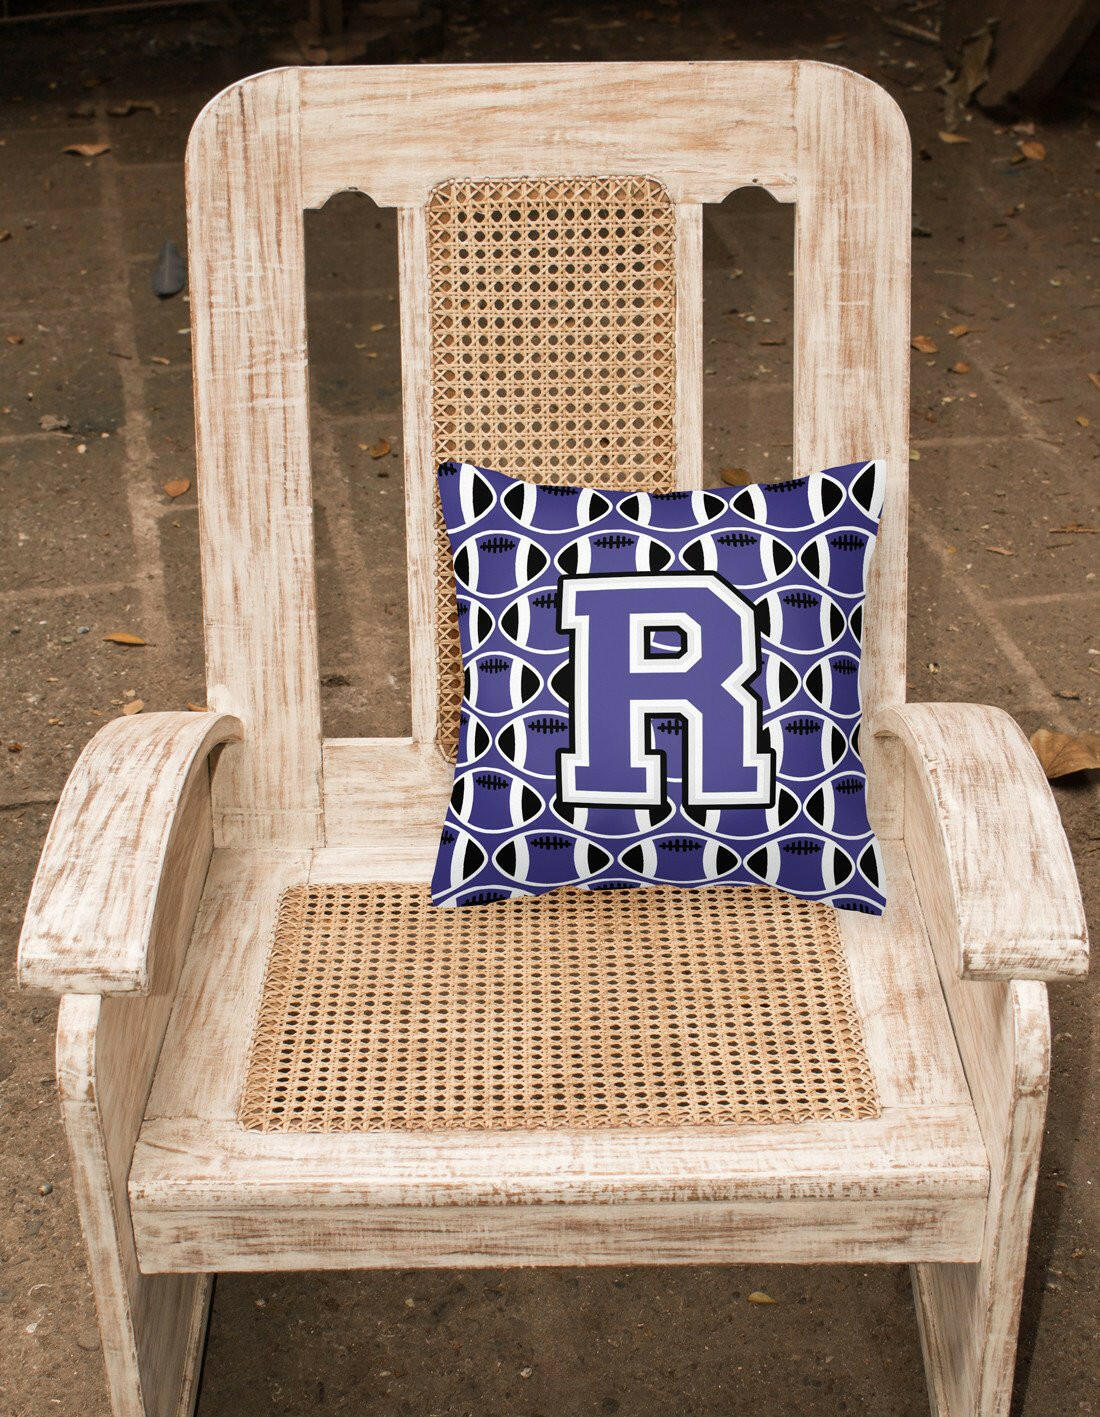 Letter R Football Purple and White Fabric Decorative Pillow CJ1068-RPW1414 by Caroline's Treasures